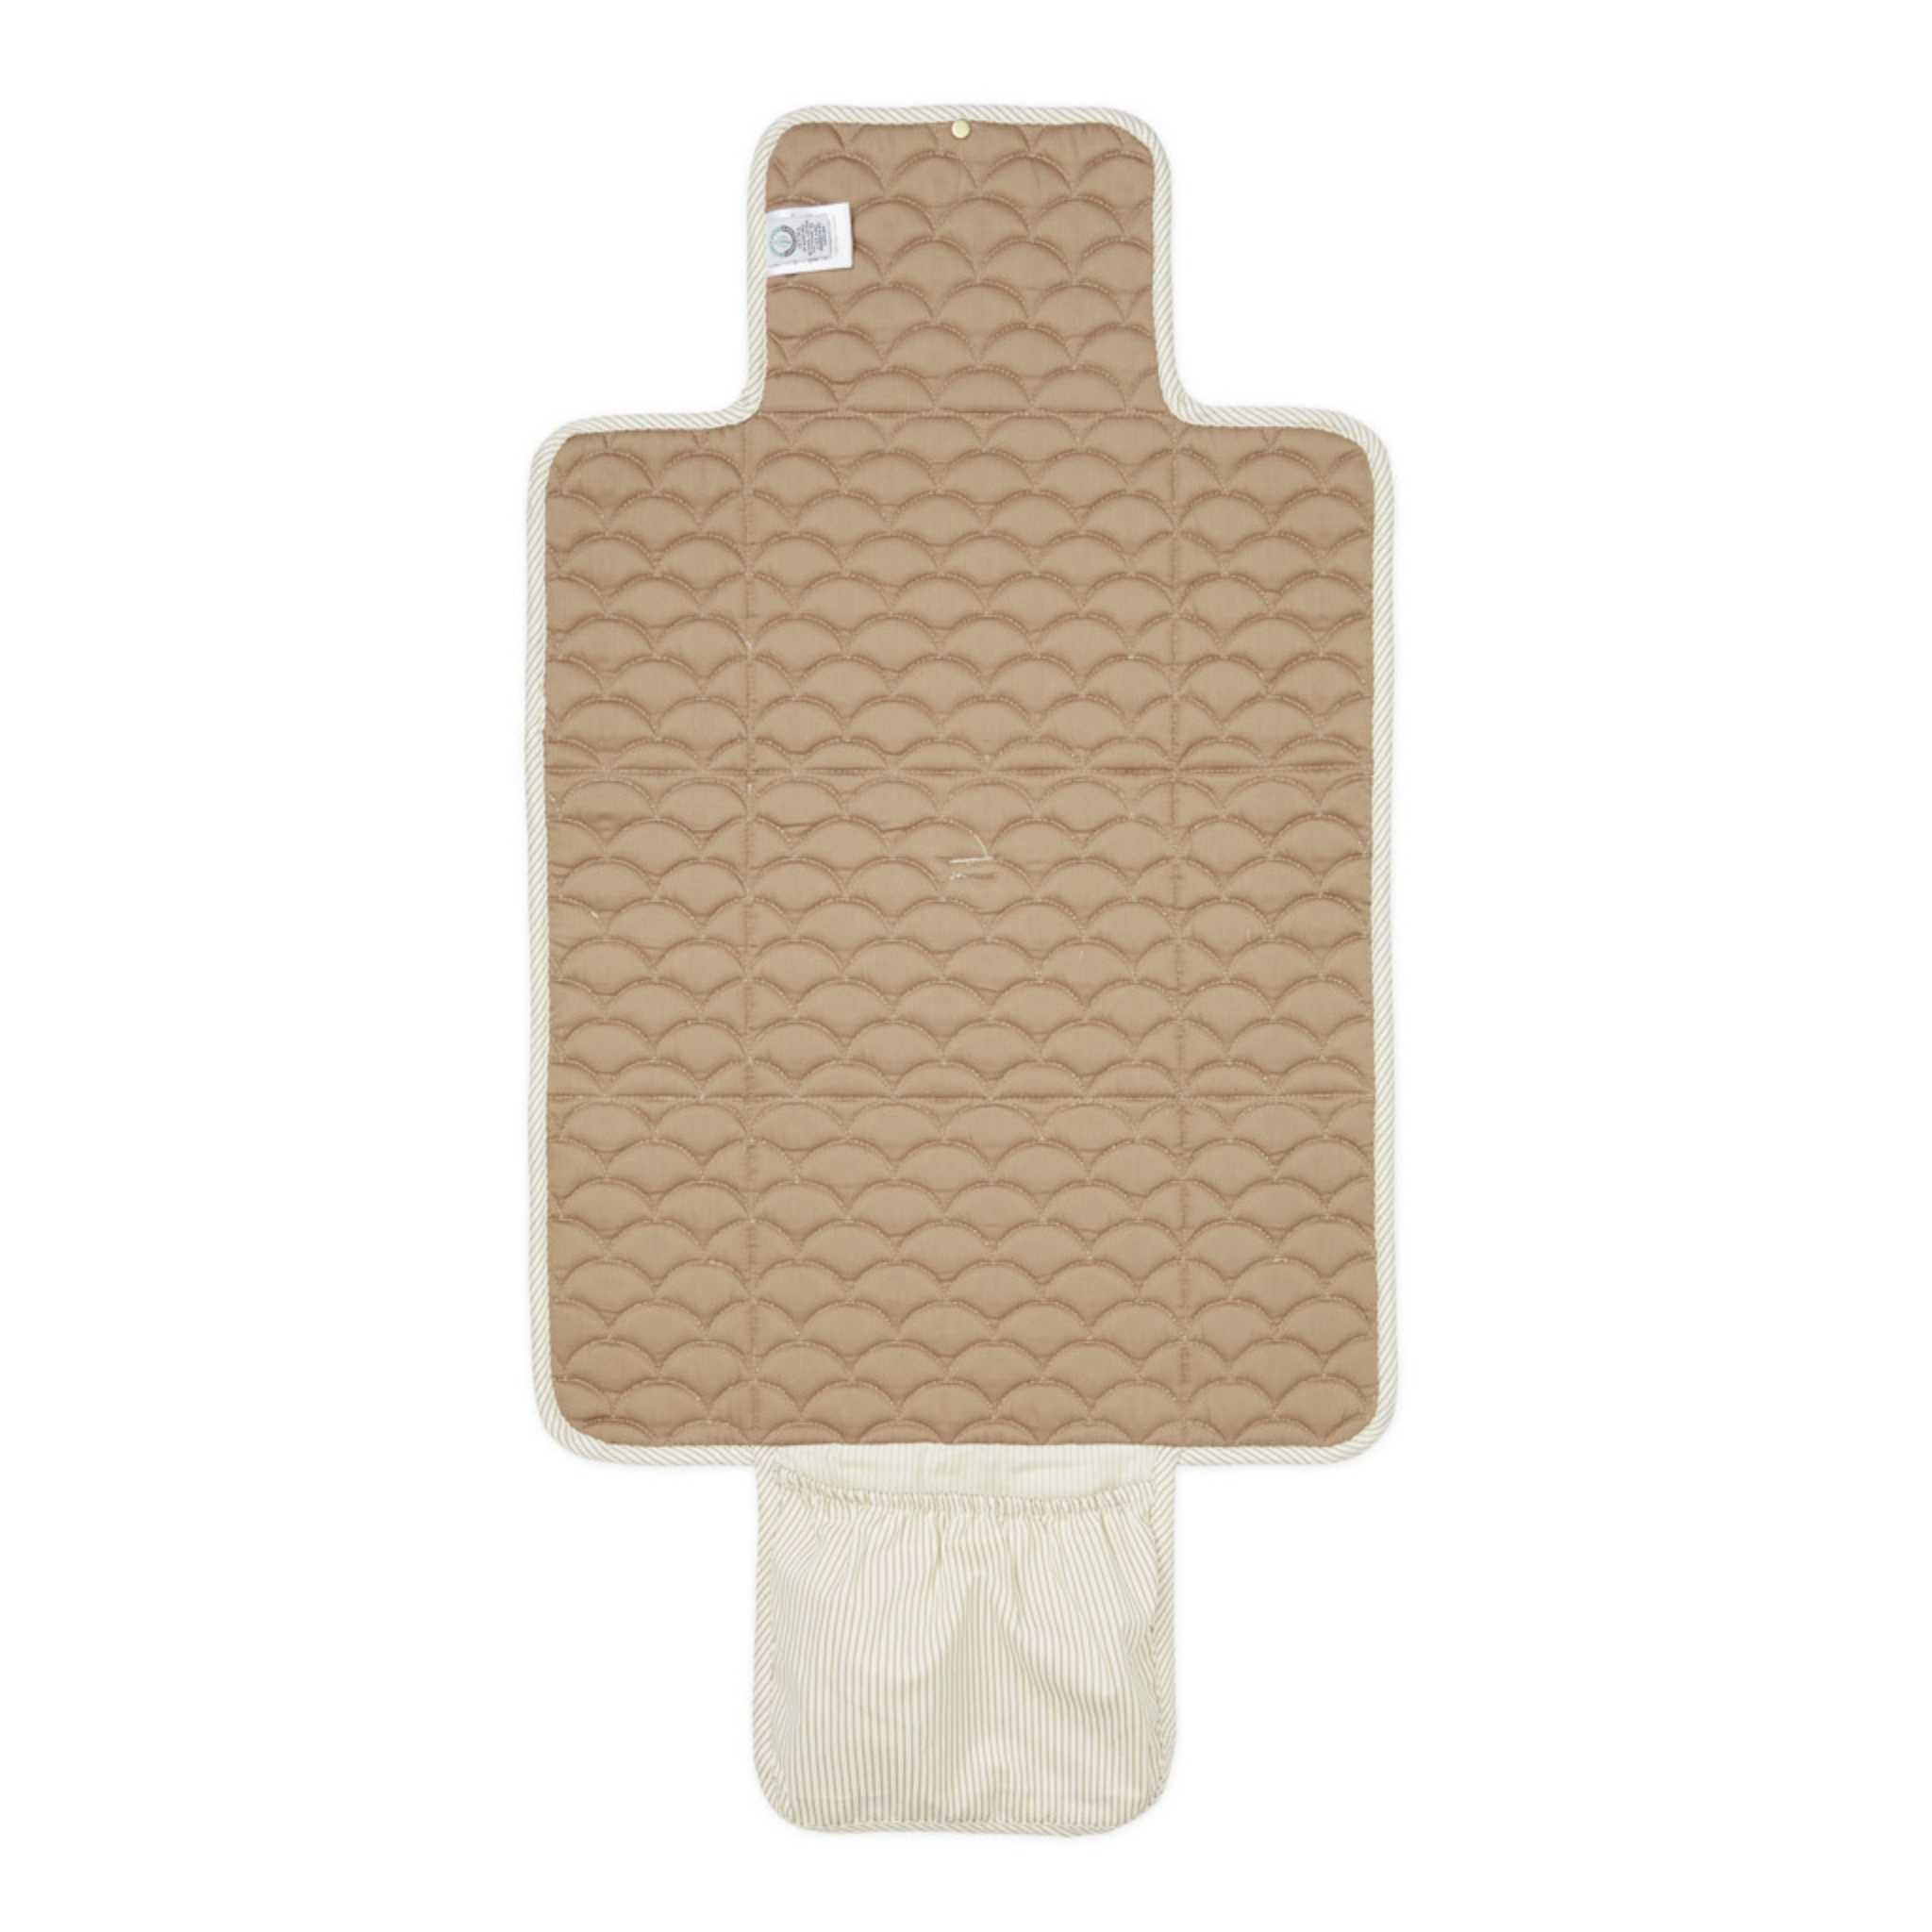 Cam Cam Quilted Changing Mat - Classic Camel Stripes - Opened Out